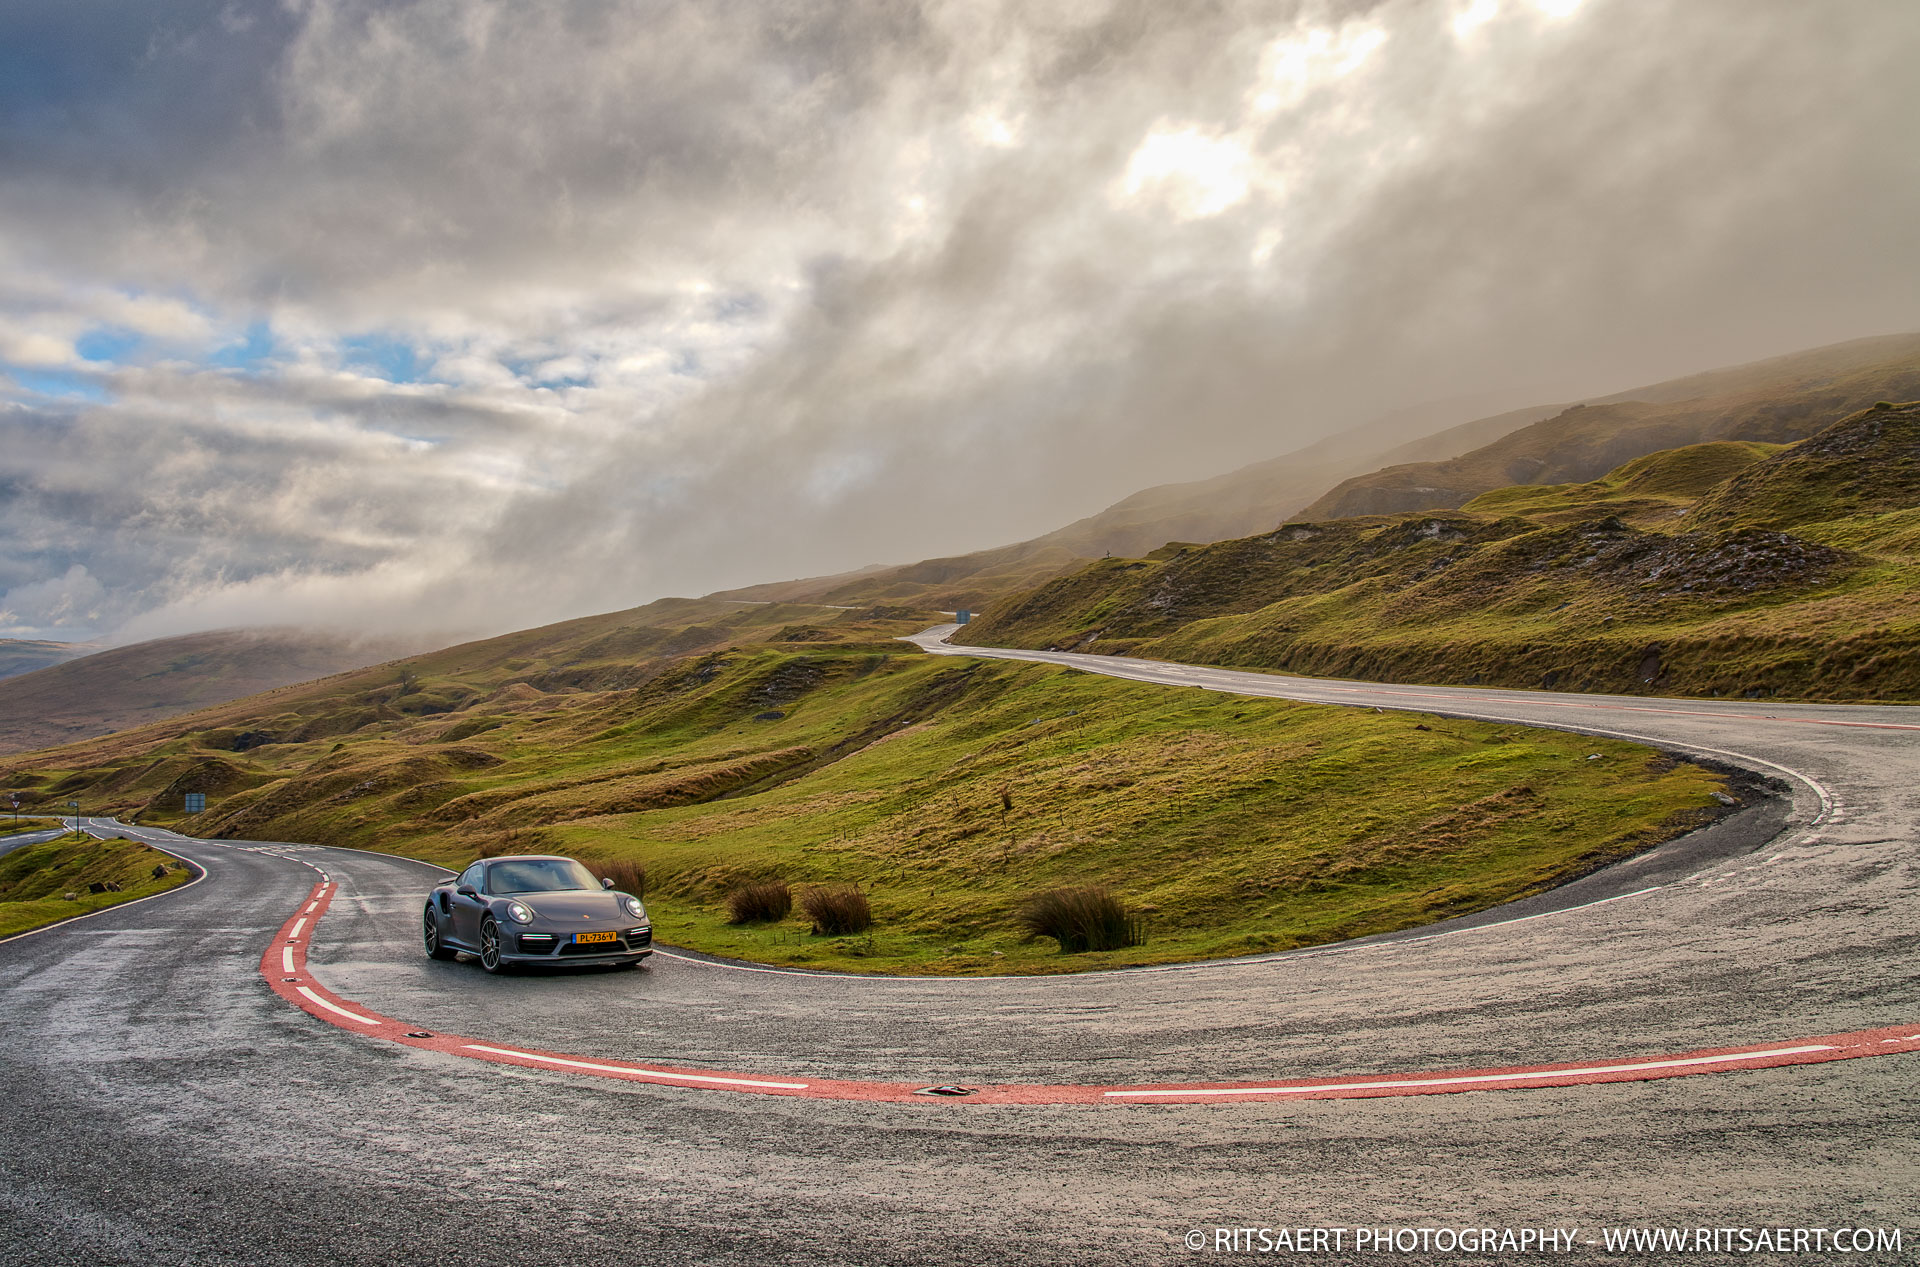 A Porsche 911 Turbo S at Topgears testroad Black Mountain Road A4069 Brecon Beacons Wales UK